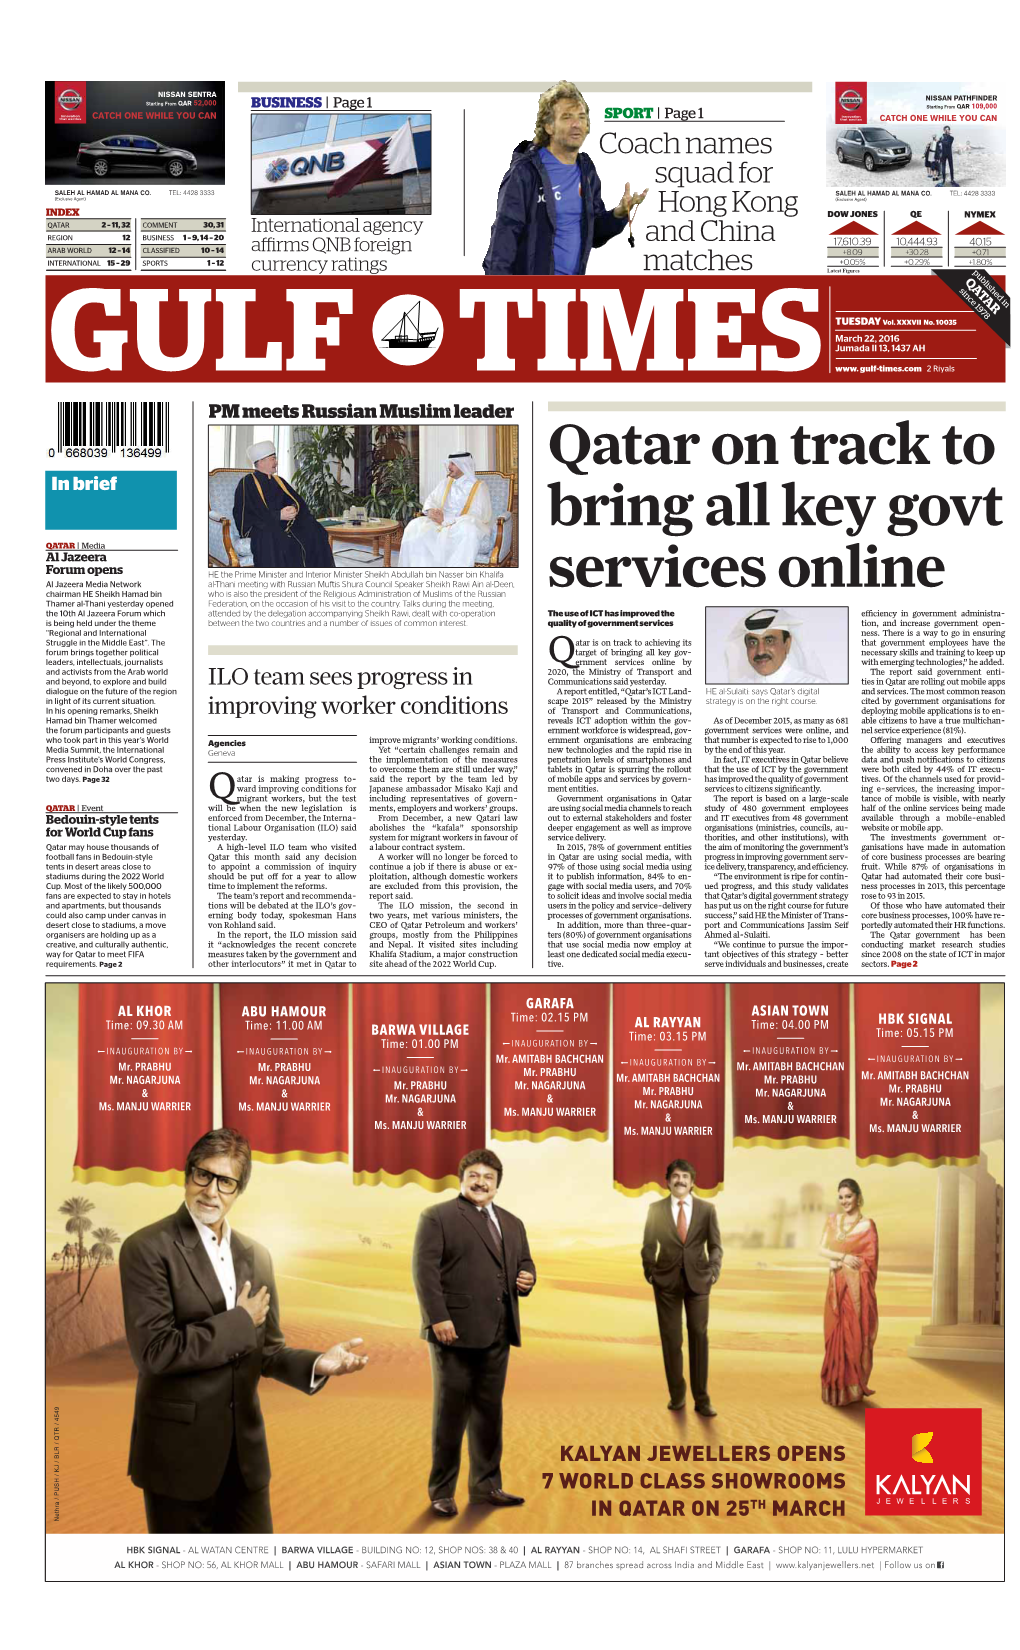 Qatar on Track to Bring All Key Govt Services Online